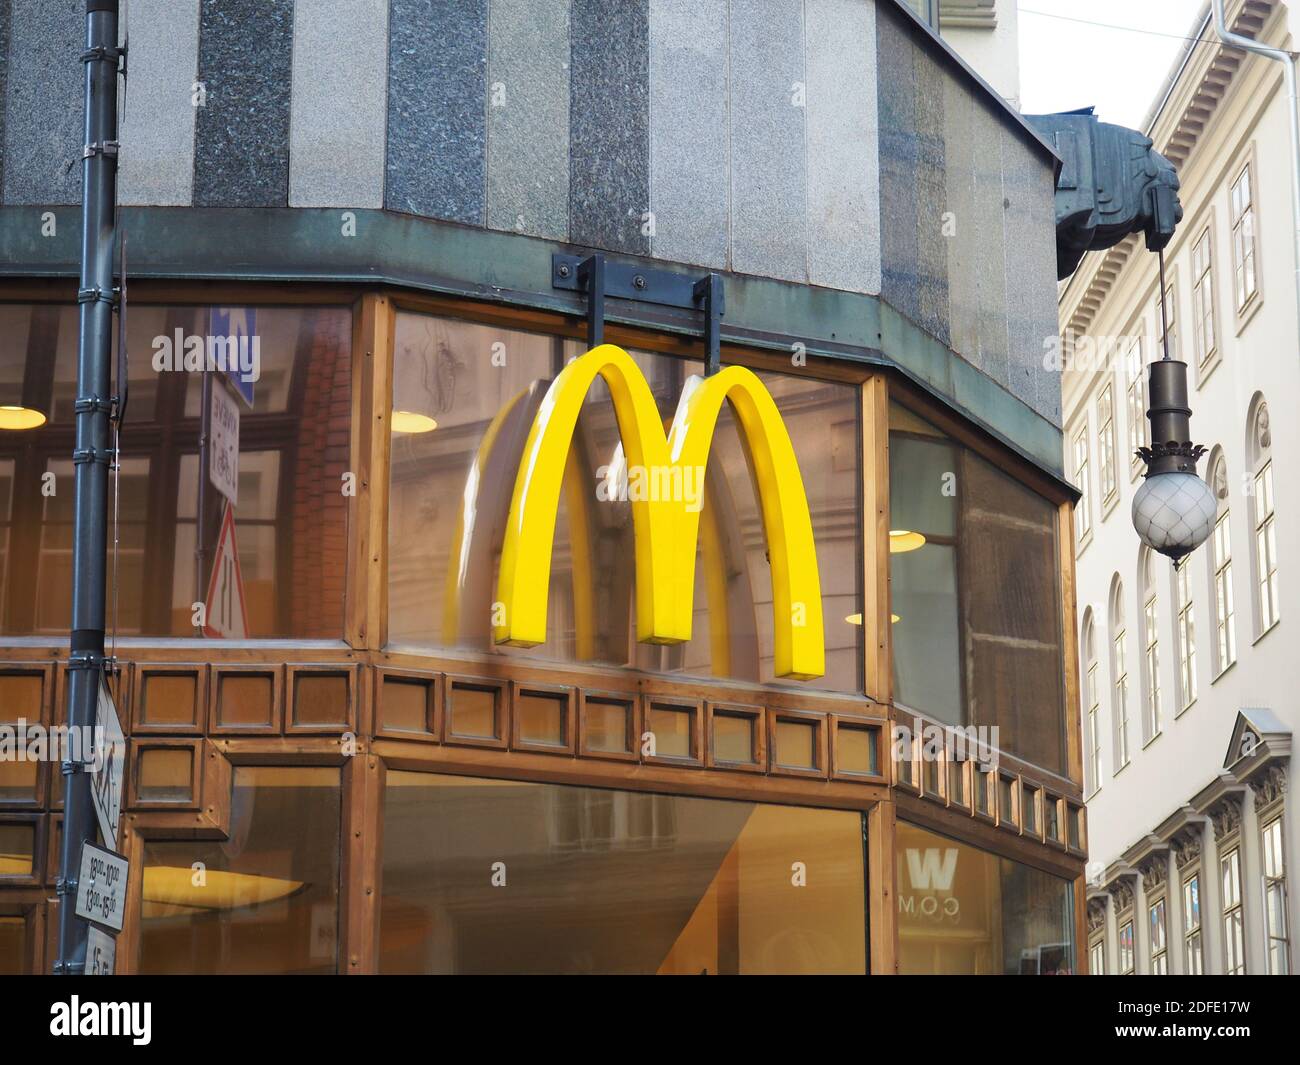 Budapest, Hungary - November 3, 2020: Yellow curved Mc Donald's logo sign on the facade of a Mac Donald restaurant in Budapest downtown Stock Photo